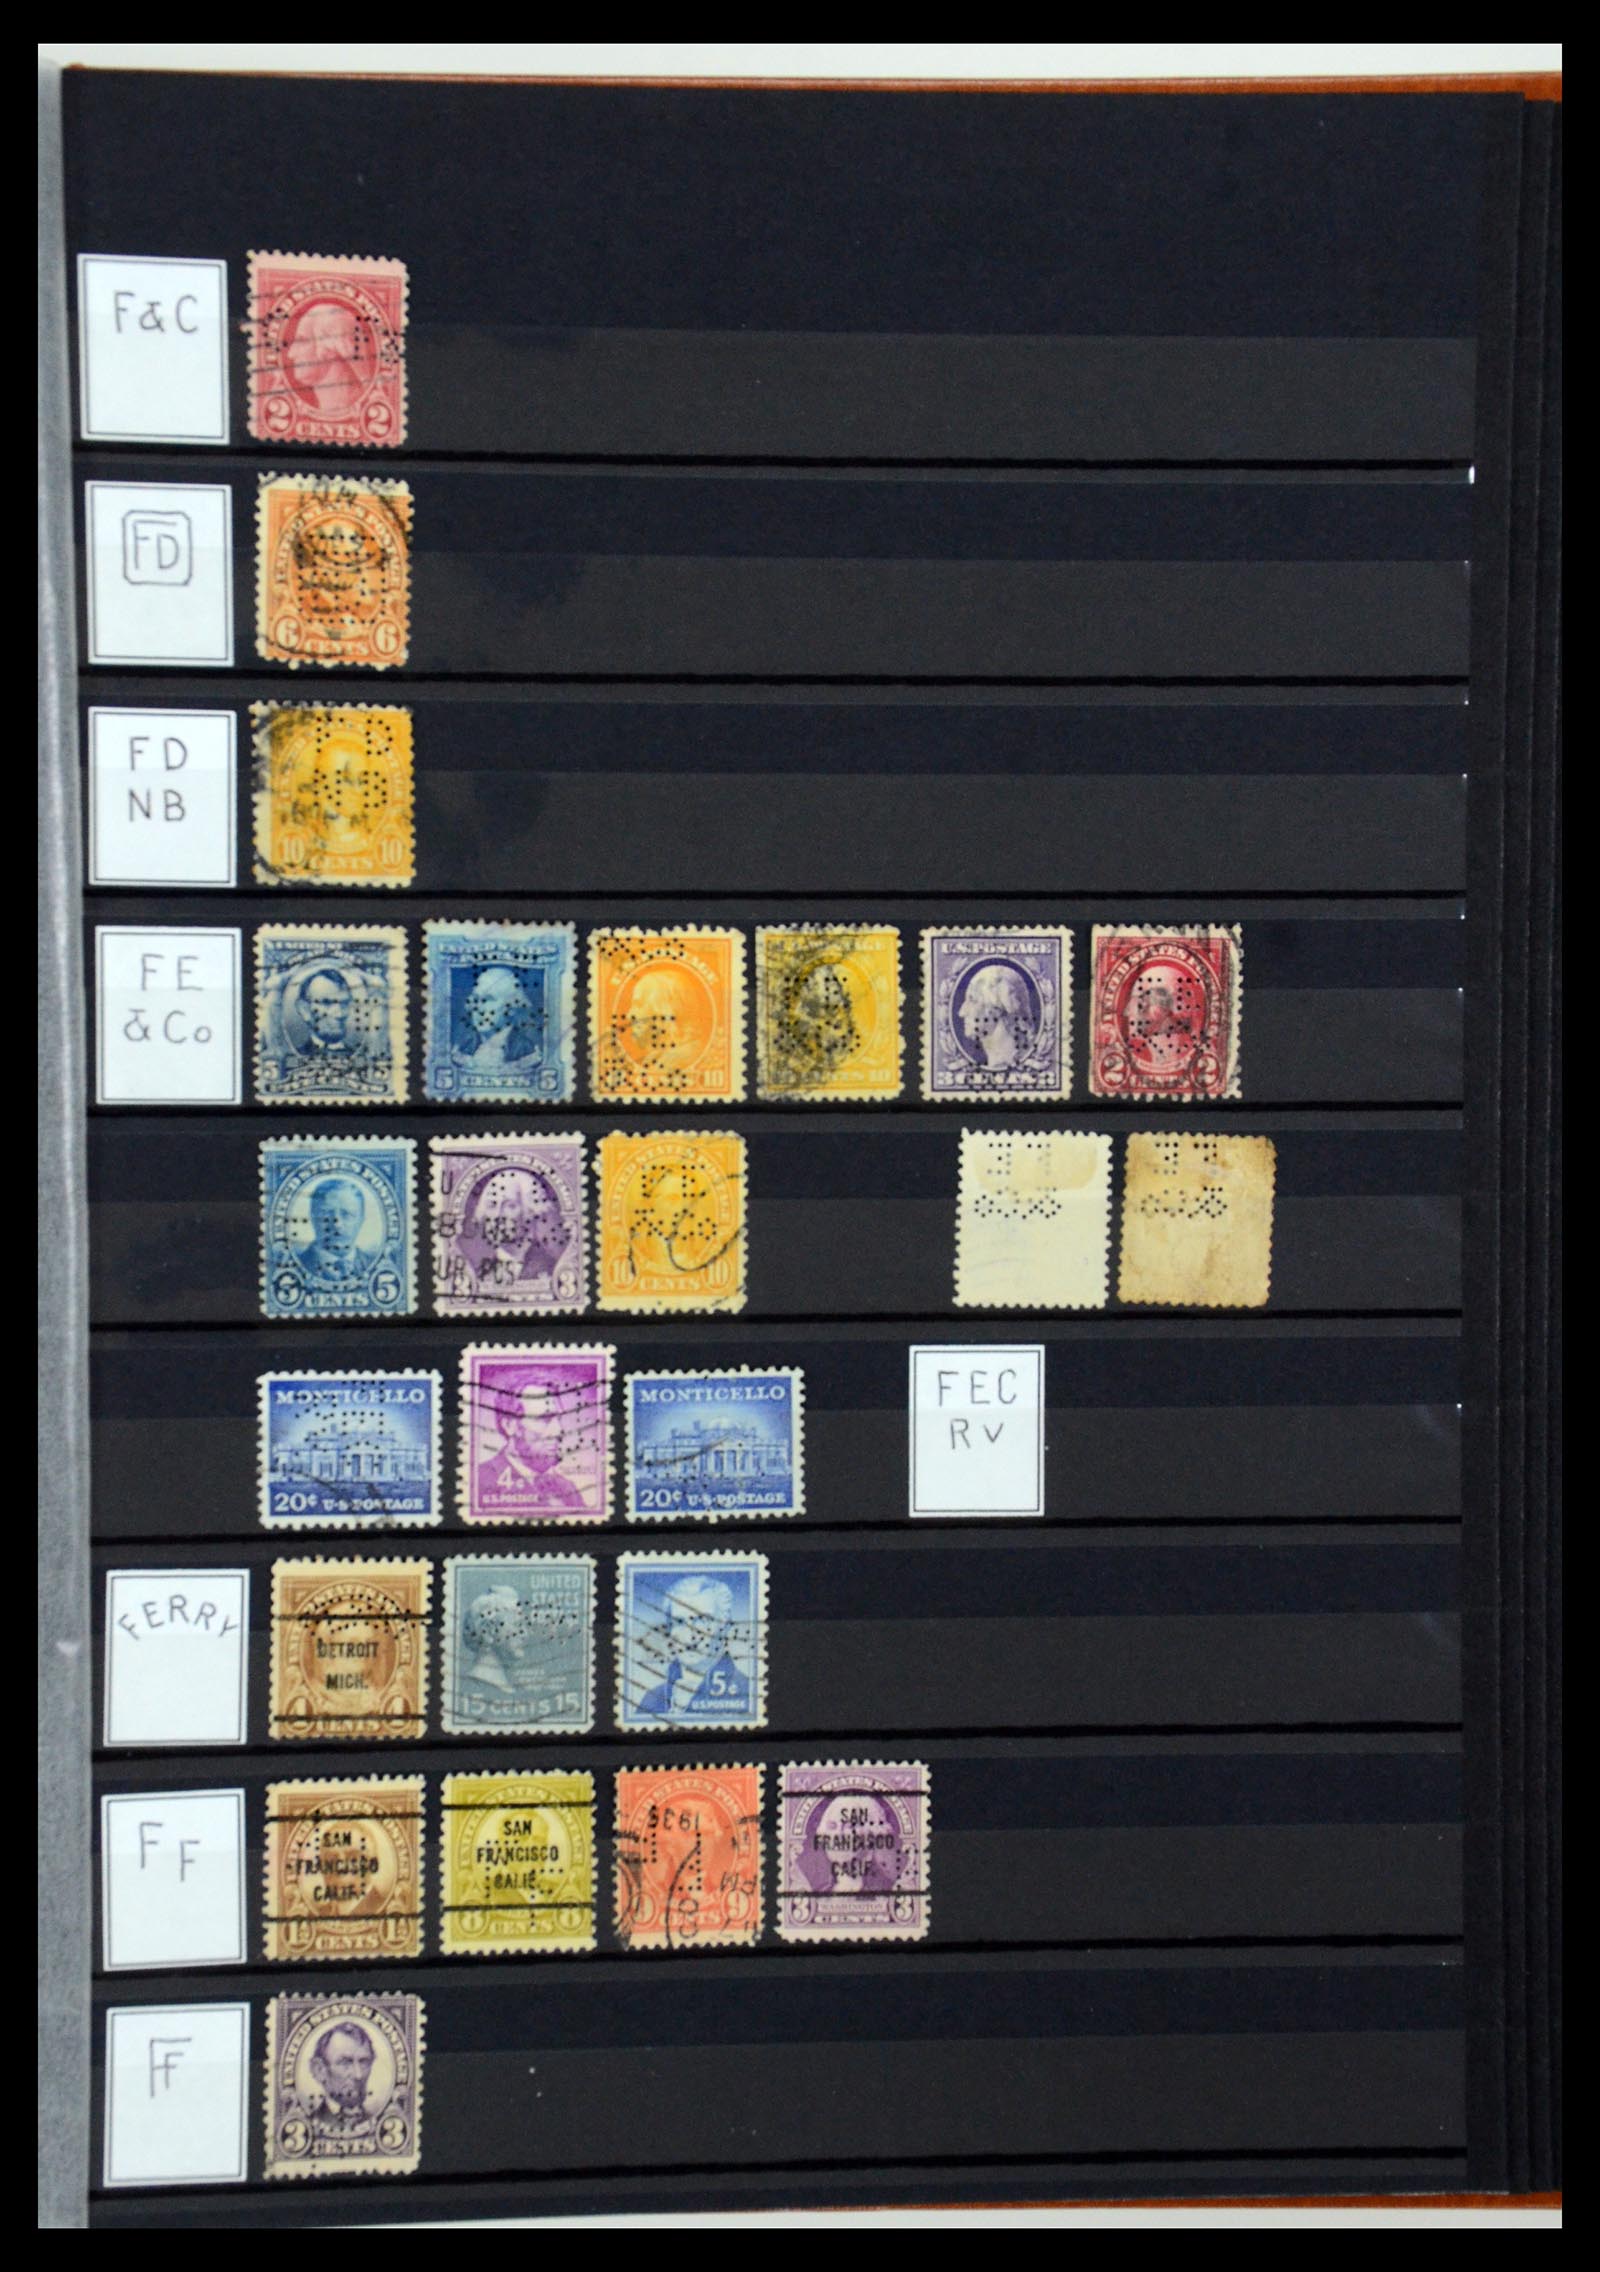 36388 045 - Stamp collection 36388 USA perfins.